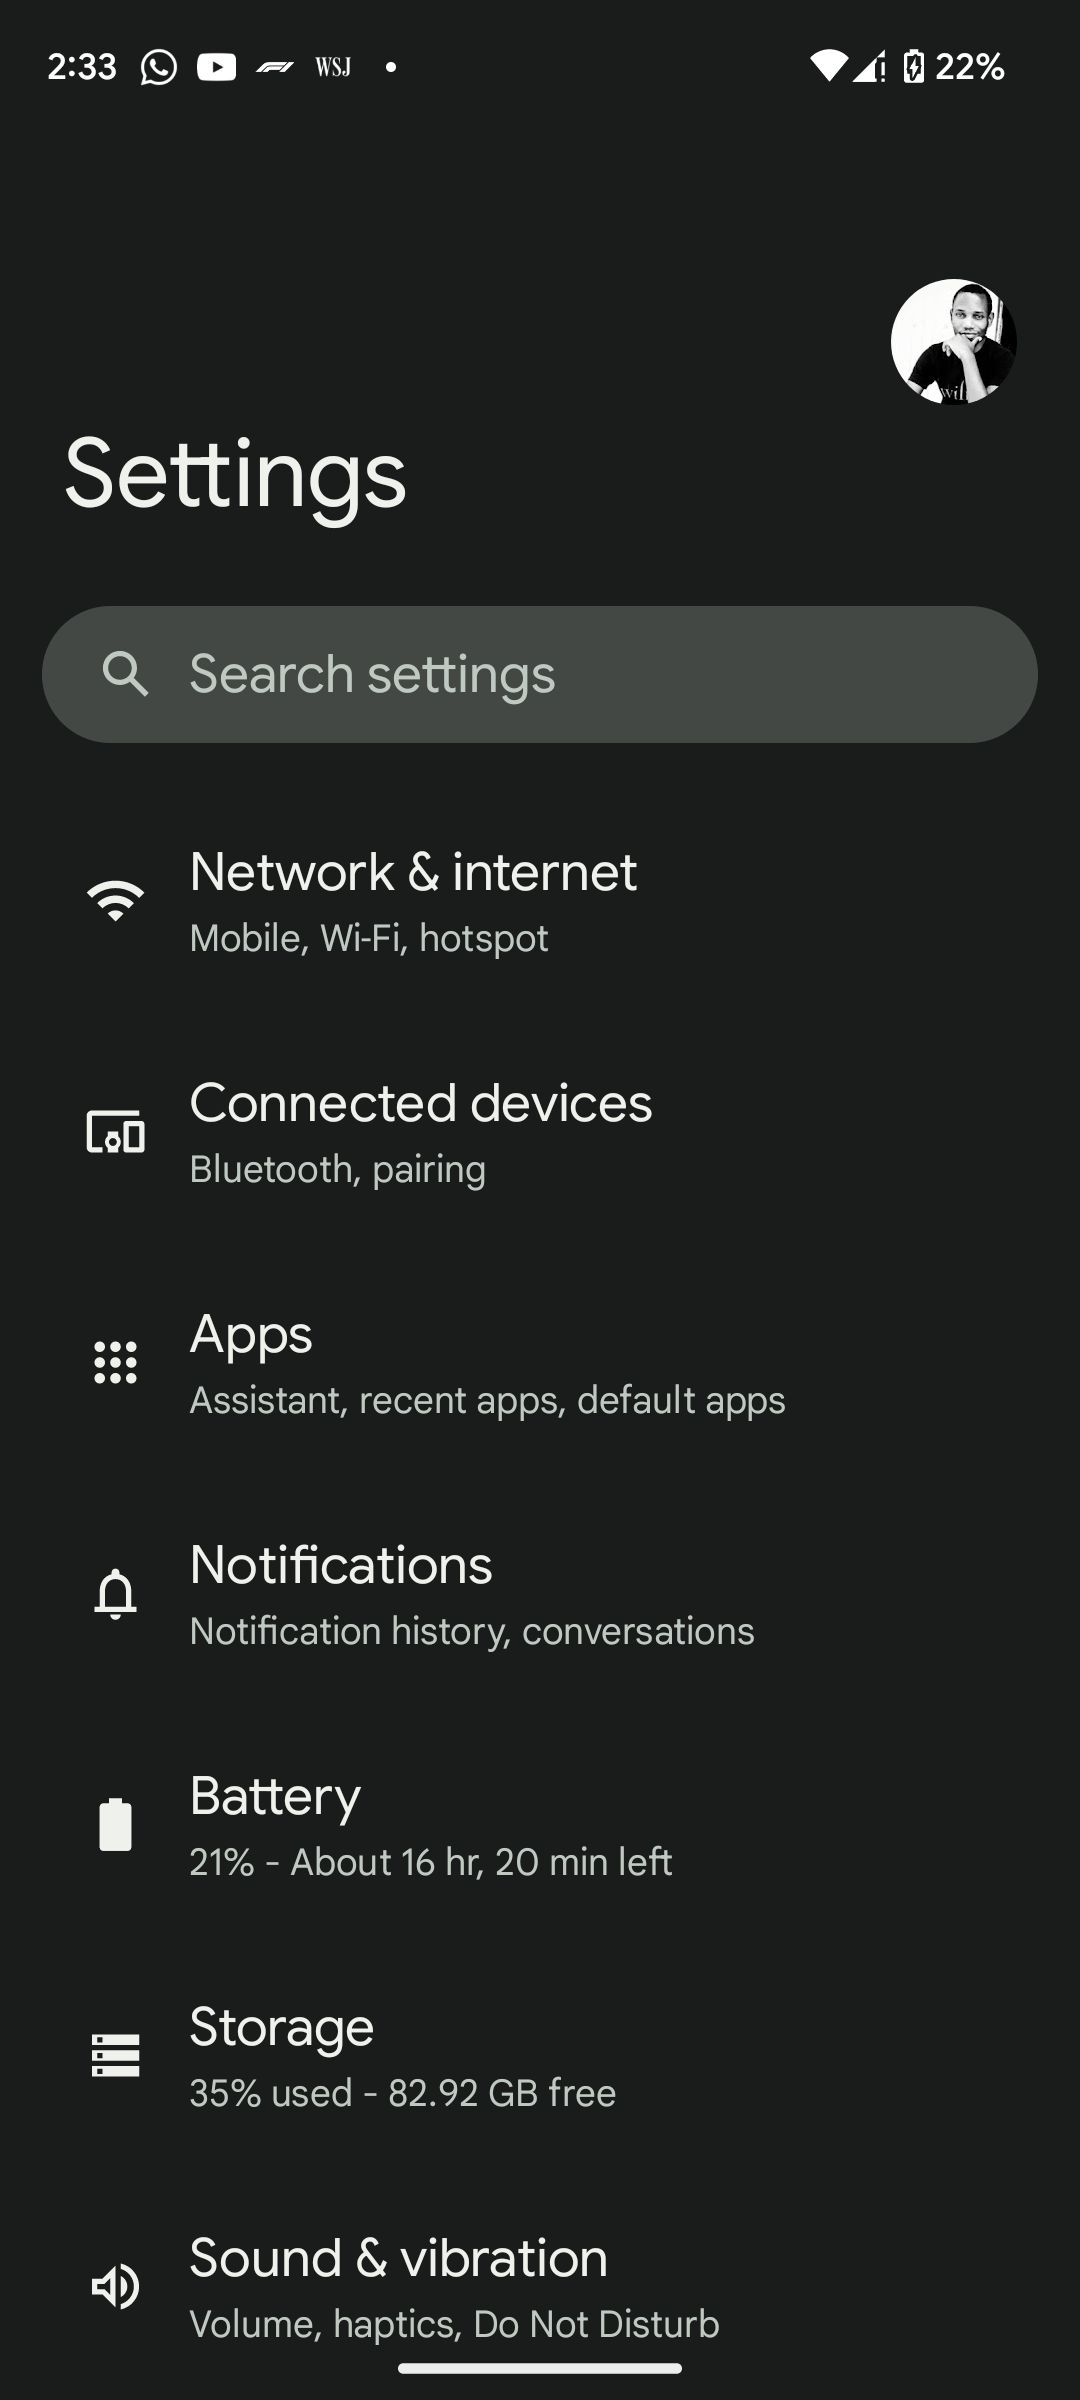 Android's Settings app